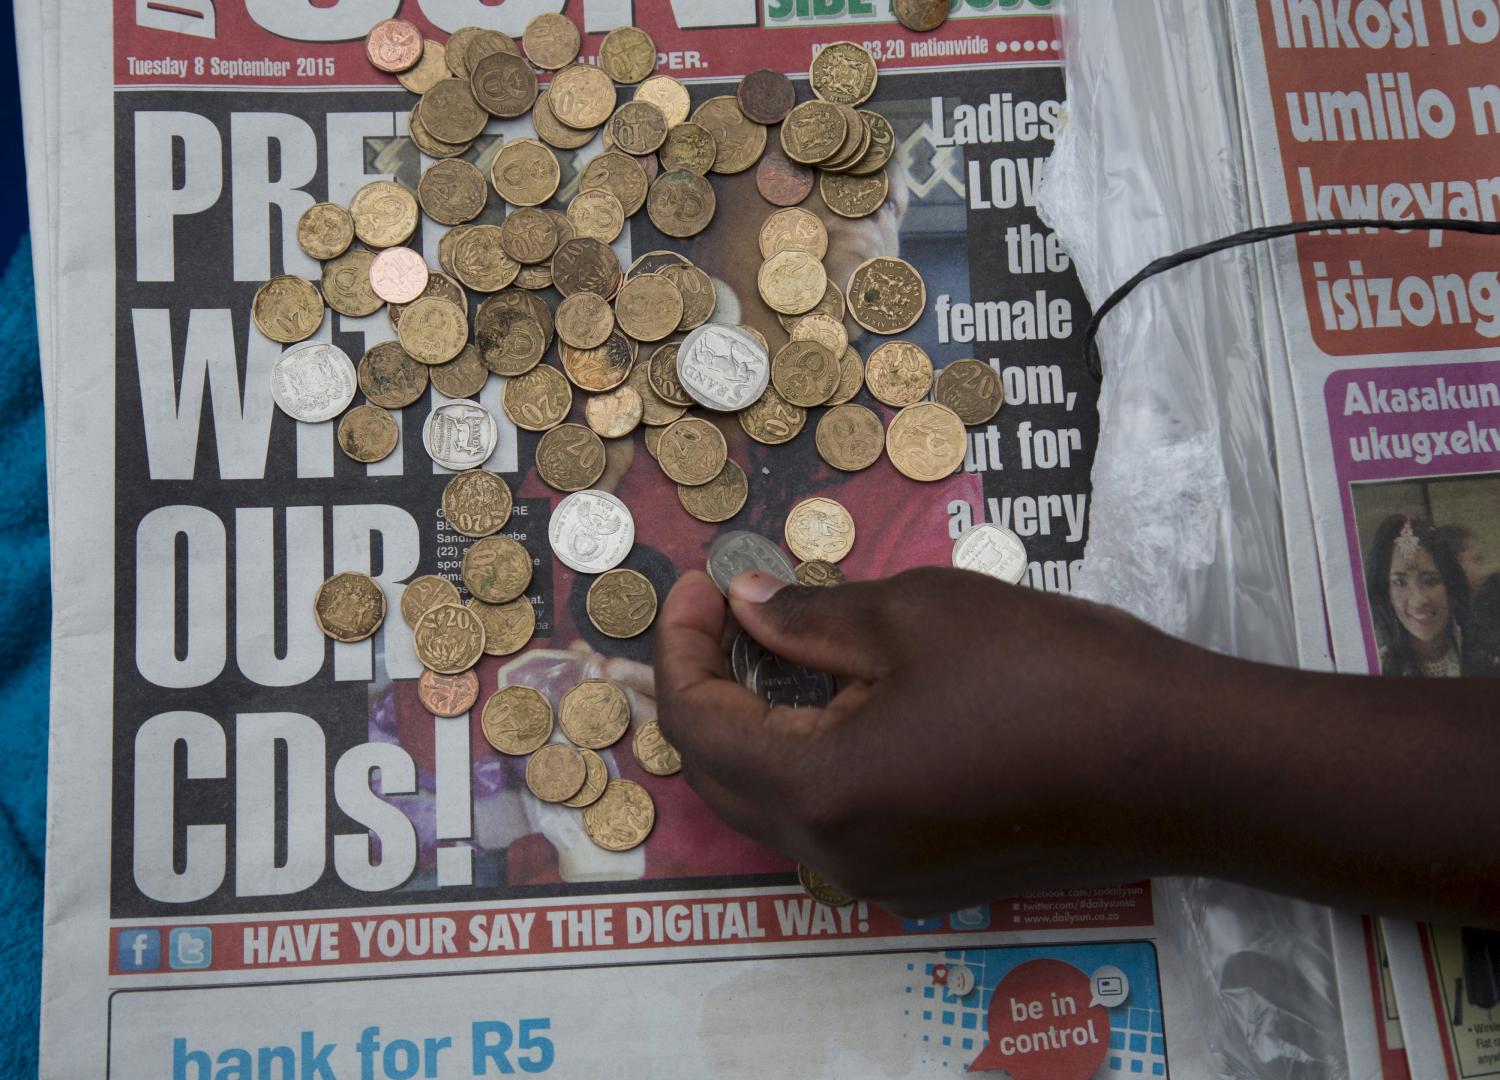 A newspaper vendor counts out change for a customer in Durban, September 8, 2015. South Africa's rand firmed more than 1 percent against the dollar, recovering from record lows in the previous session as bets on a rate hike in United States faded due to worries over global growth. The rand rose 1.04 percent to 13.8150 per dollar. REUTERS/Rogan Ward - GF10000197505